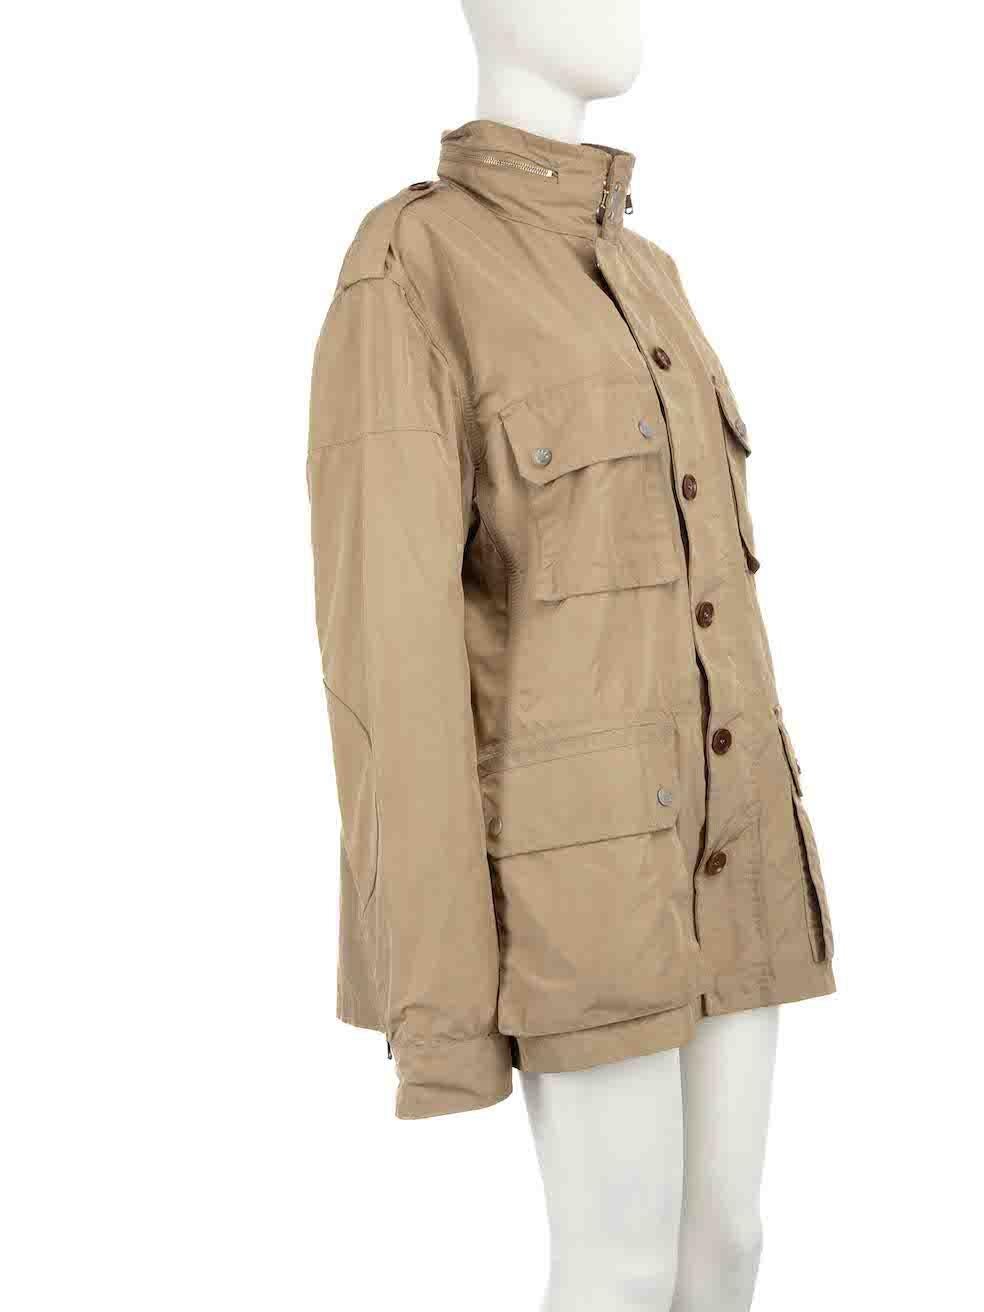 CONDITION is Good. General wear to jacket is evident. Moderate signs of wear to the front and back with discoloured marks. The front pocket buttons are also slightly tarnished and the neck zip at the back has tarnishing on this used Moncler designer